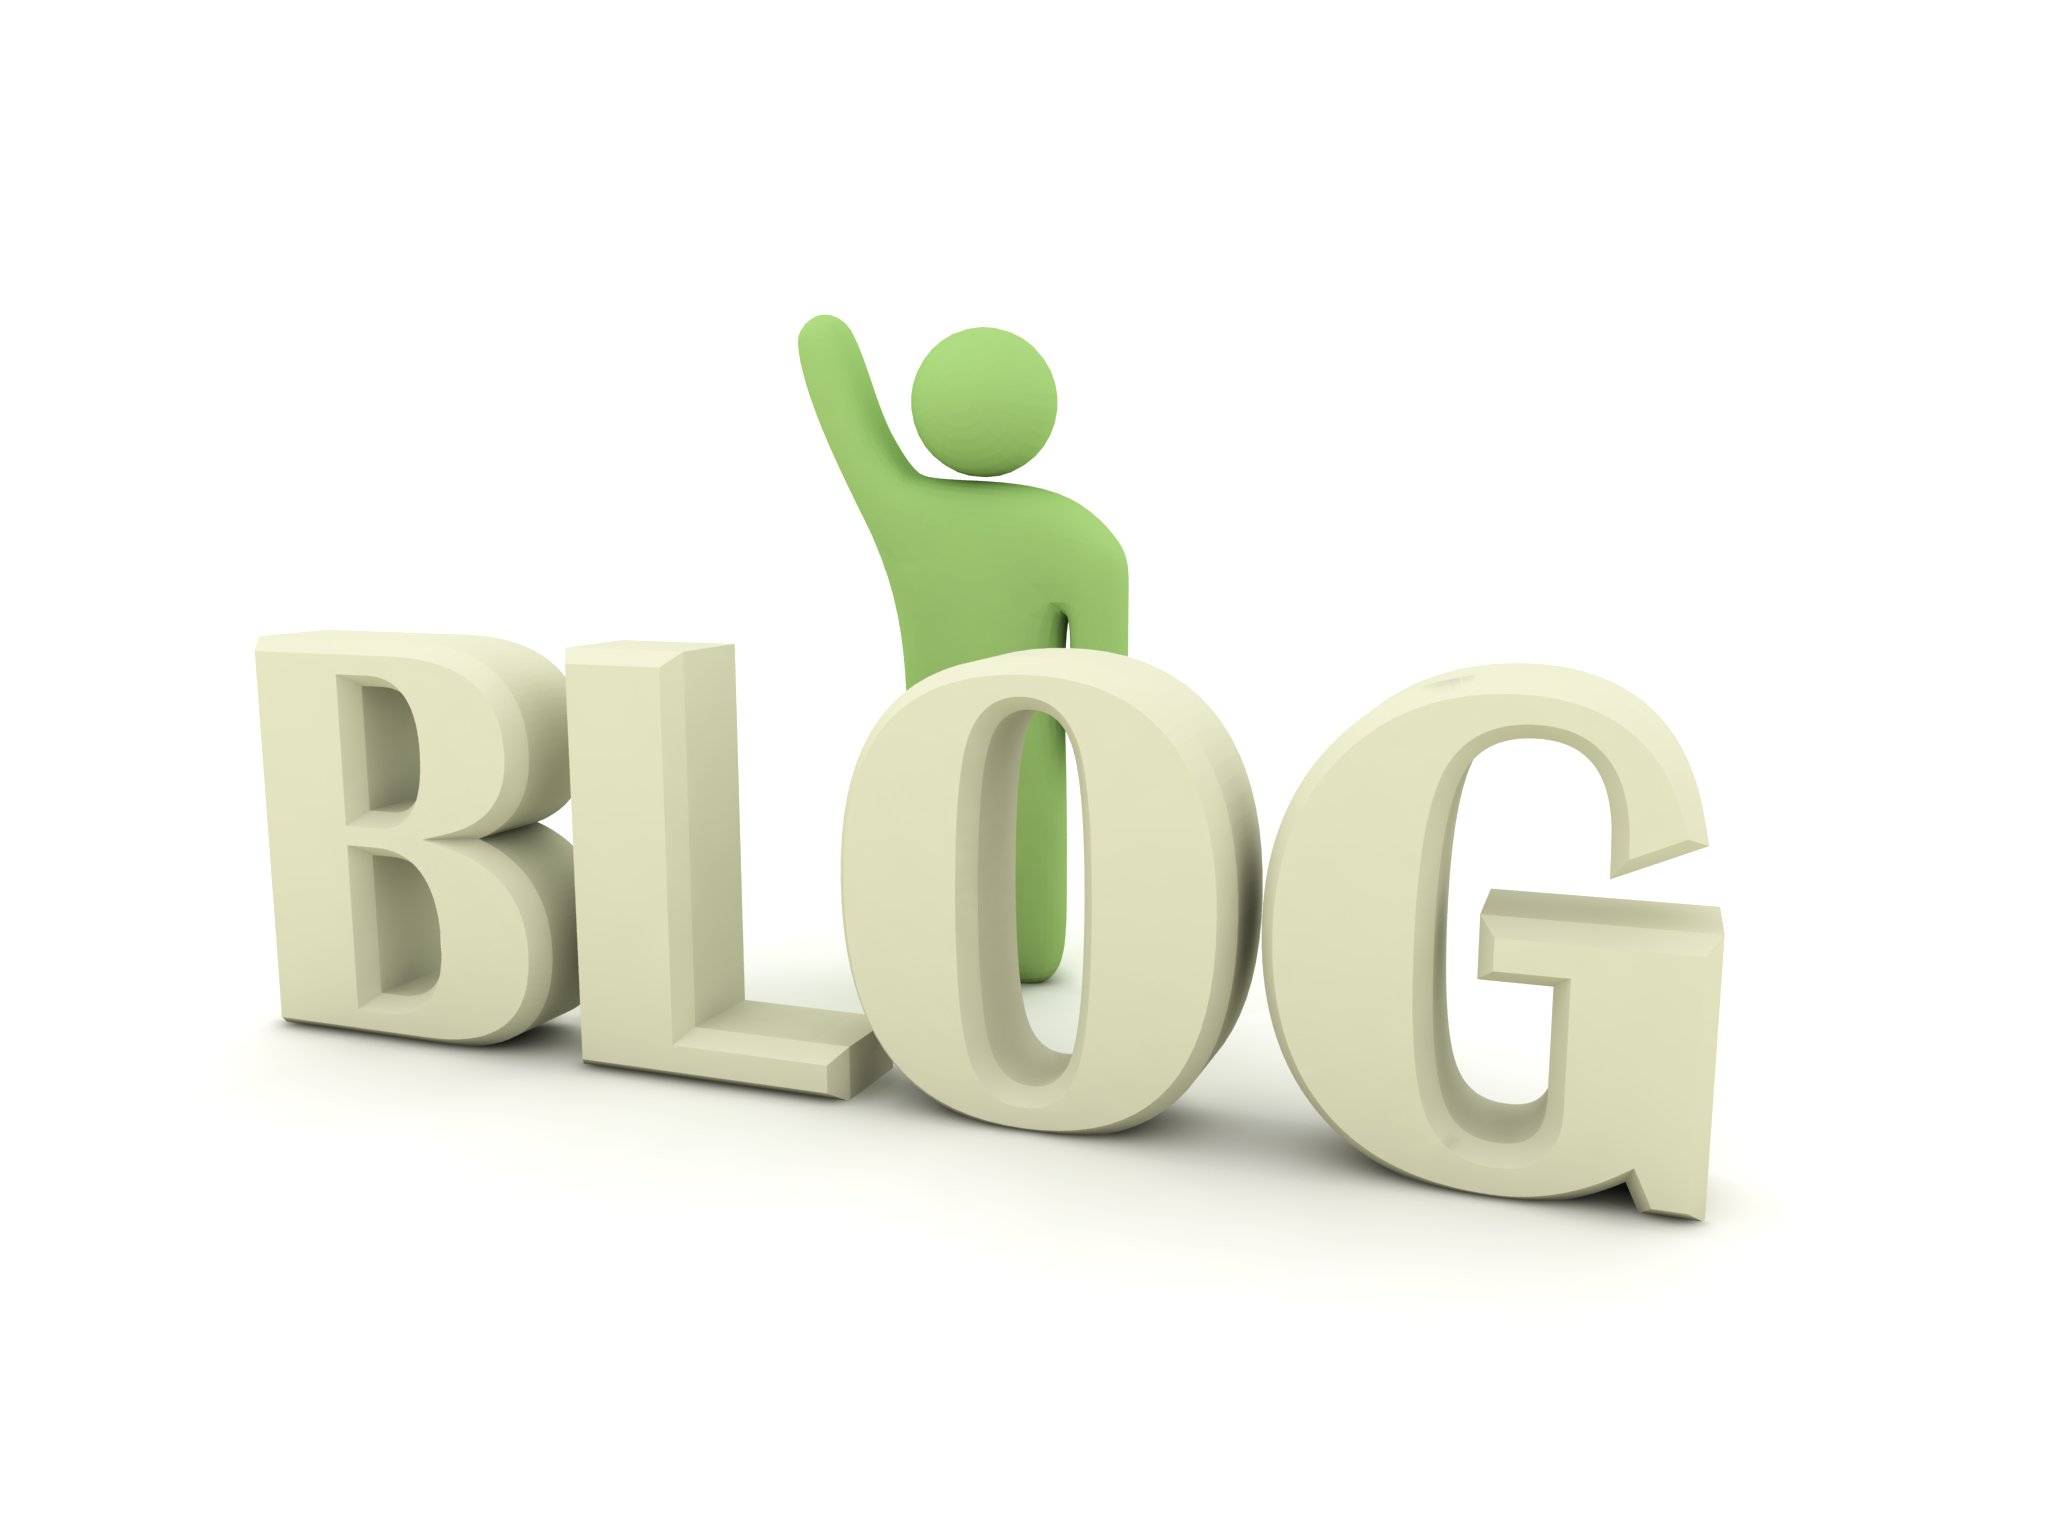 Update your blog regularly